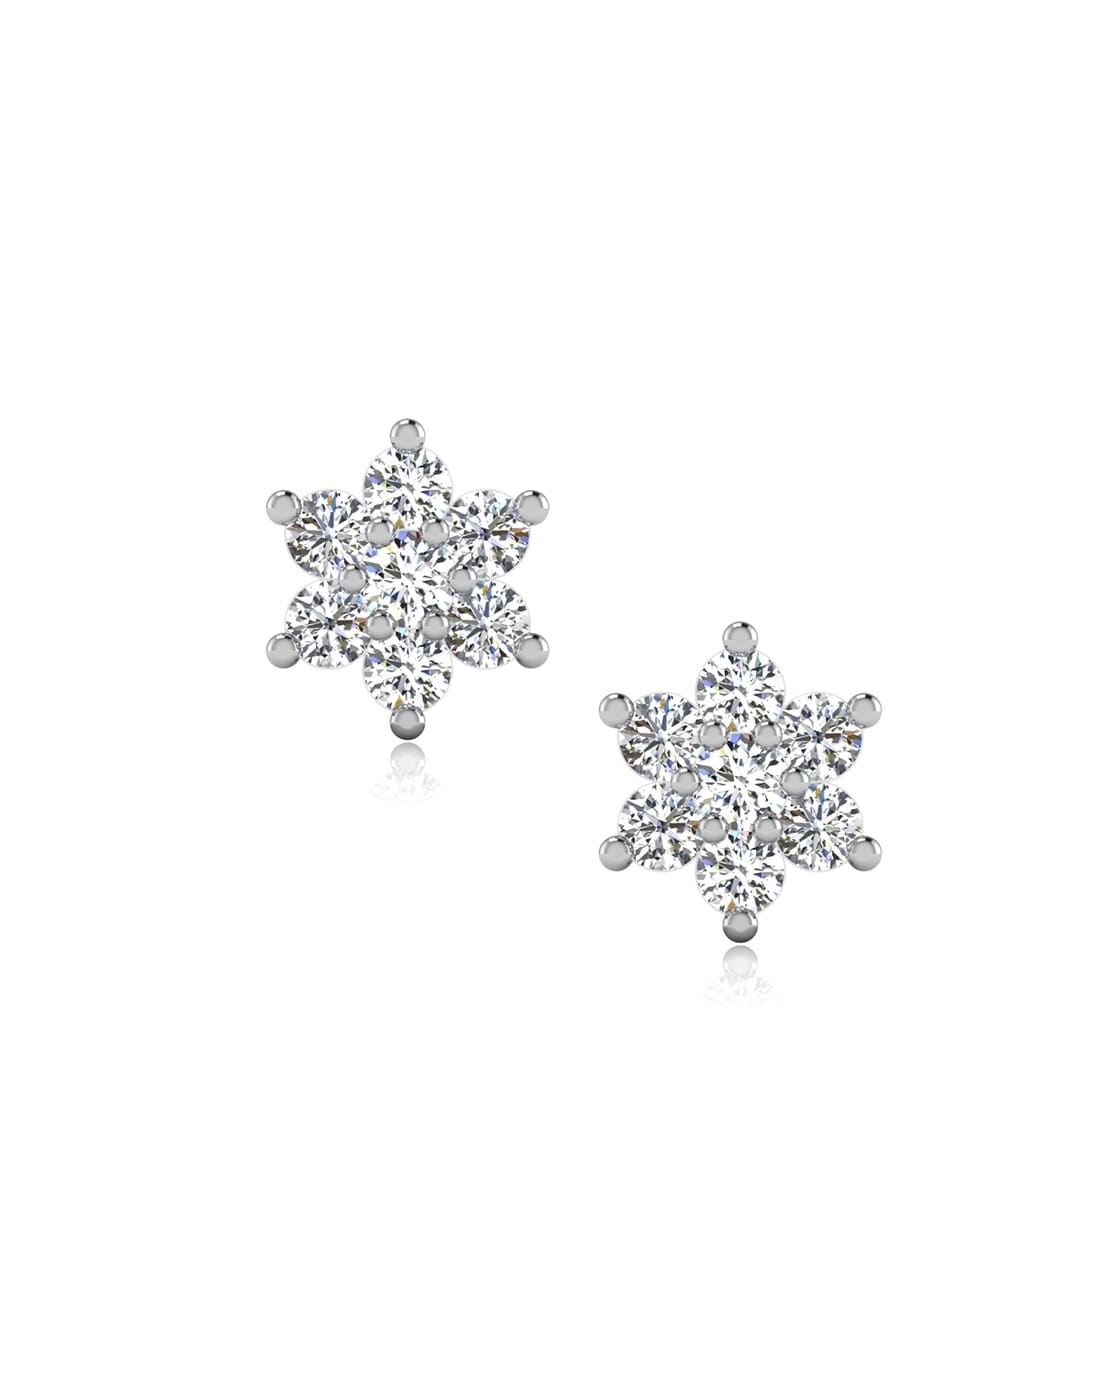 Charming Rose Gold and Diamond Fancy Stud Earrings